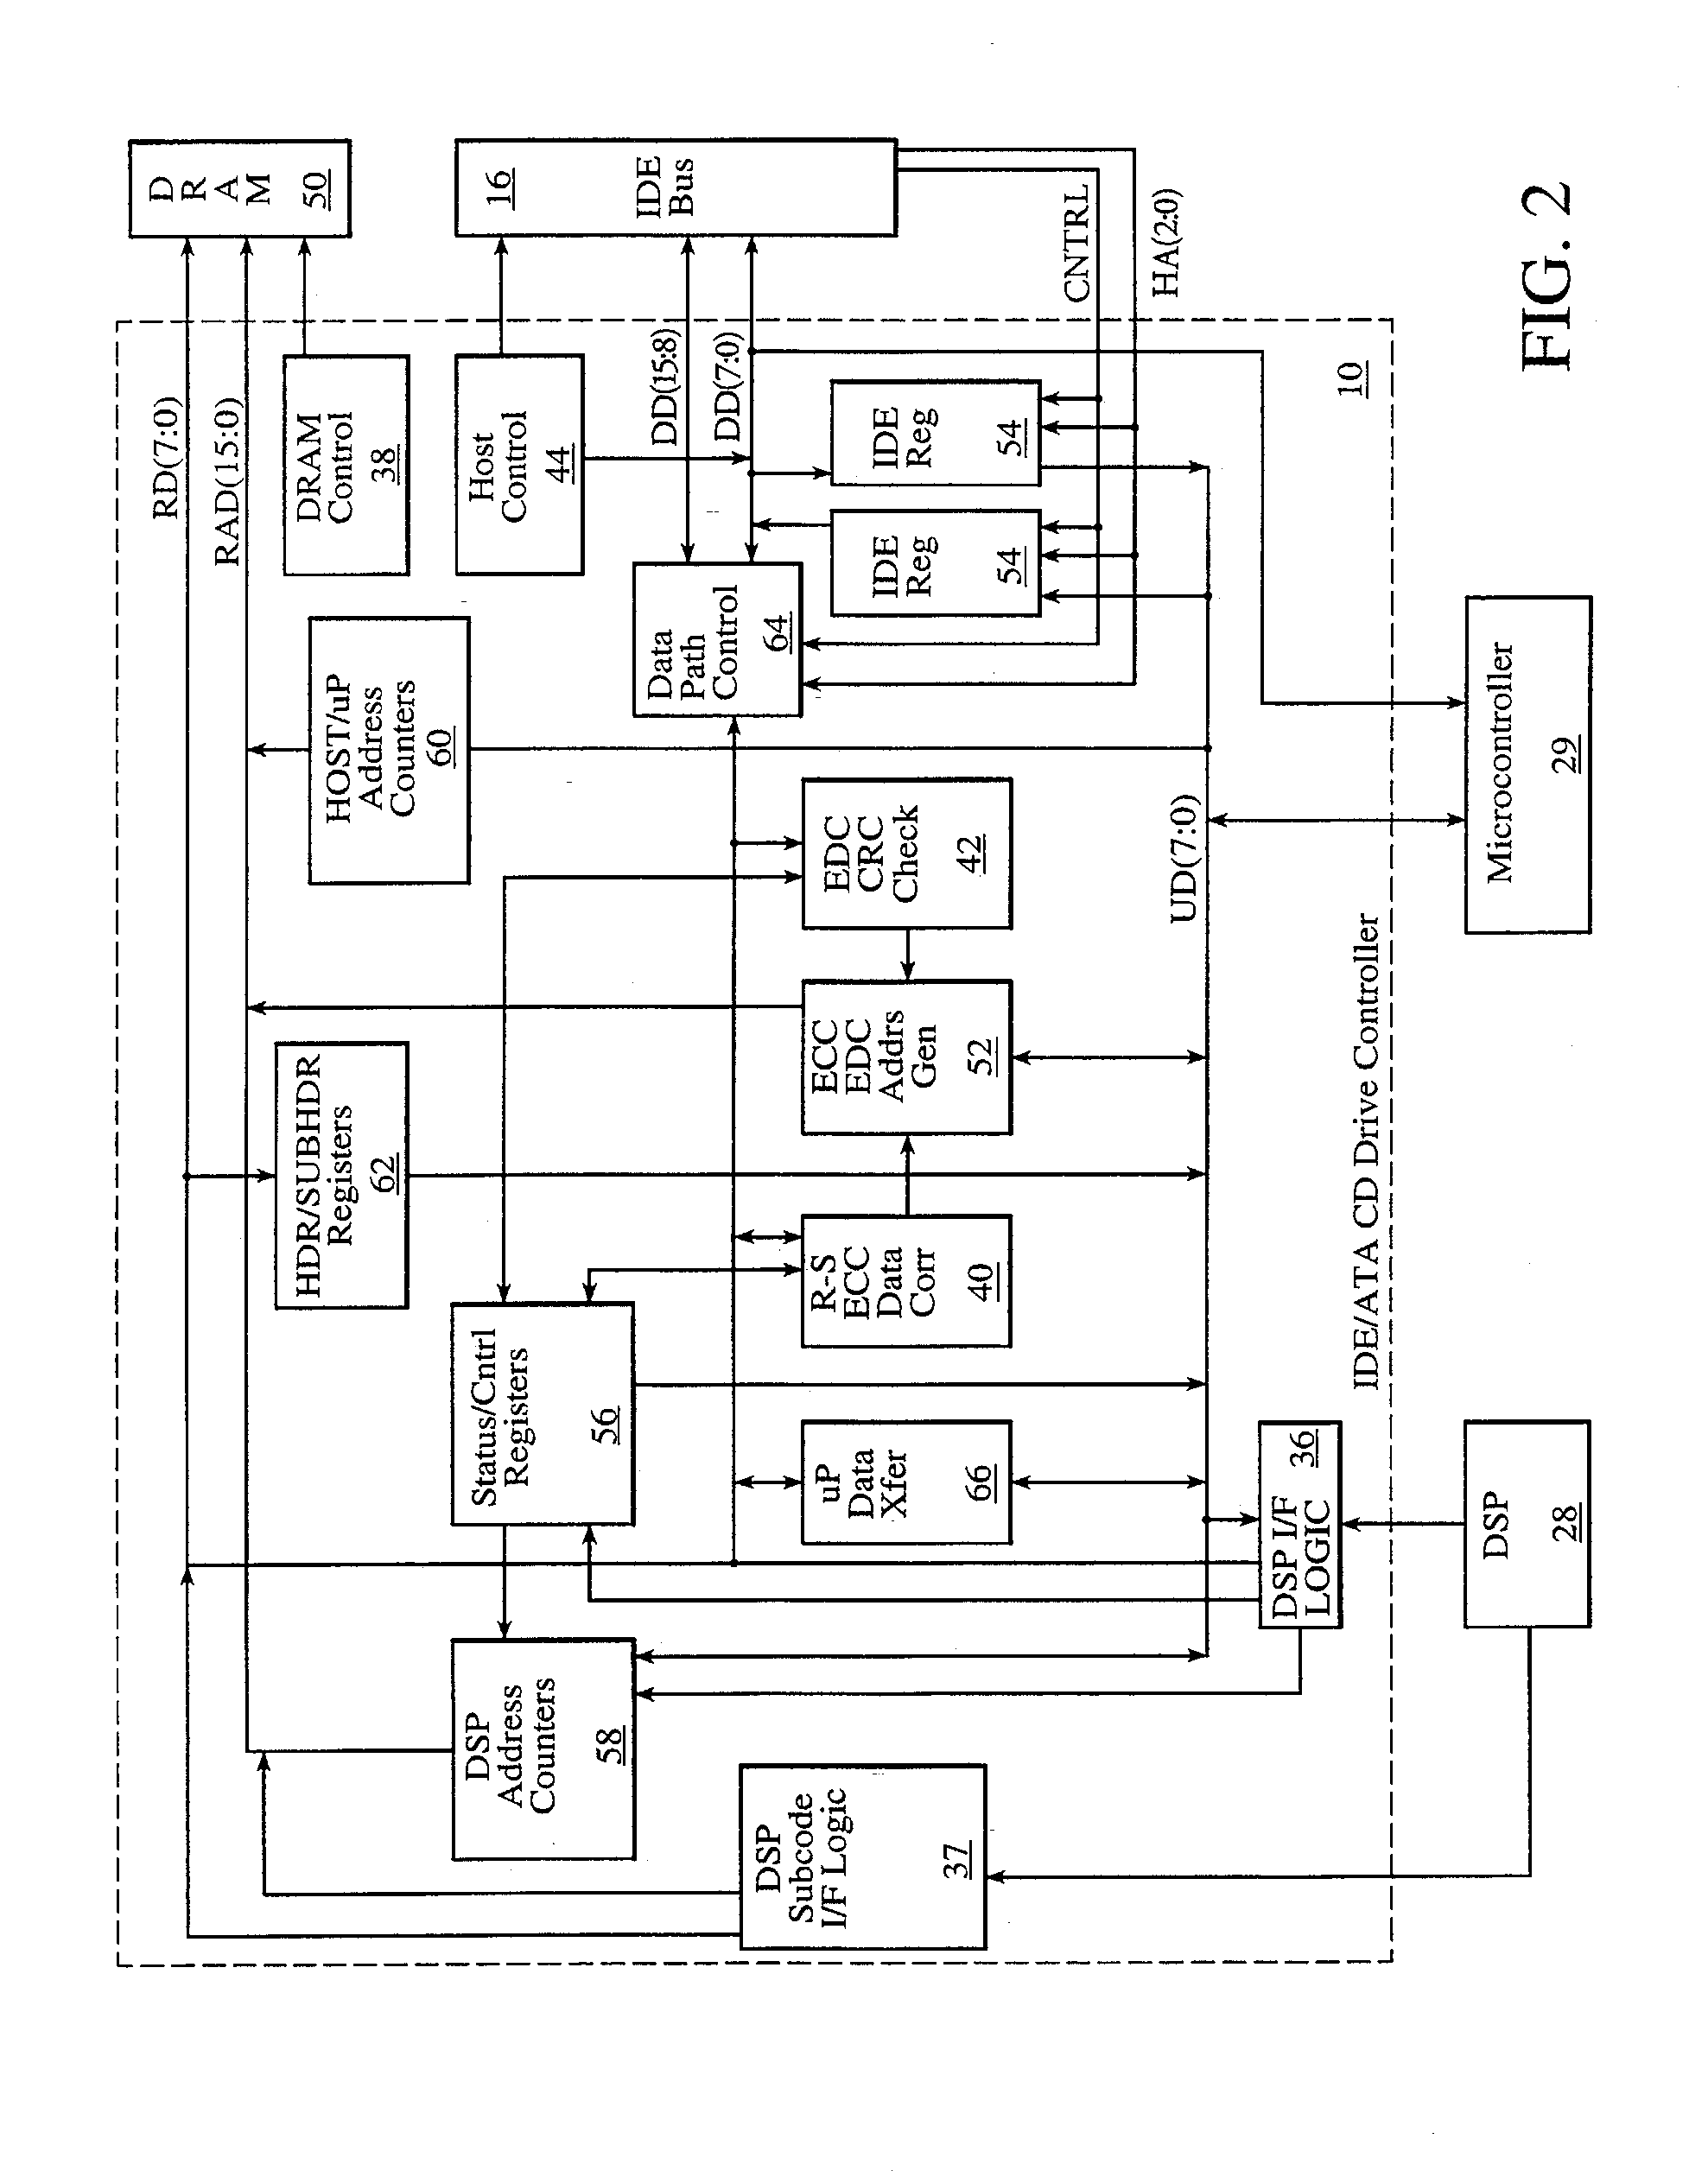 Optical drive controller with a host interface for direct connection to an ide/ata data bus